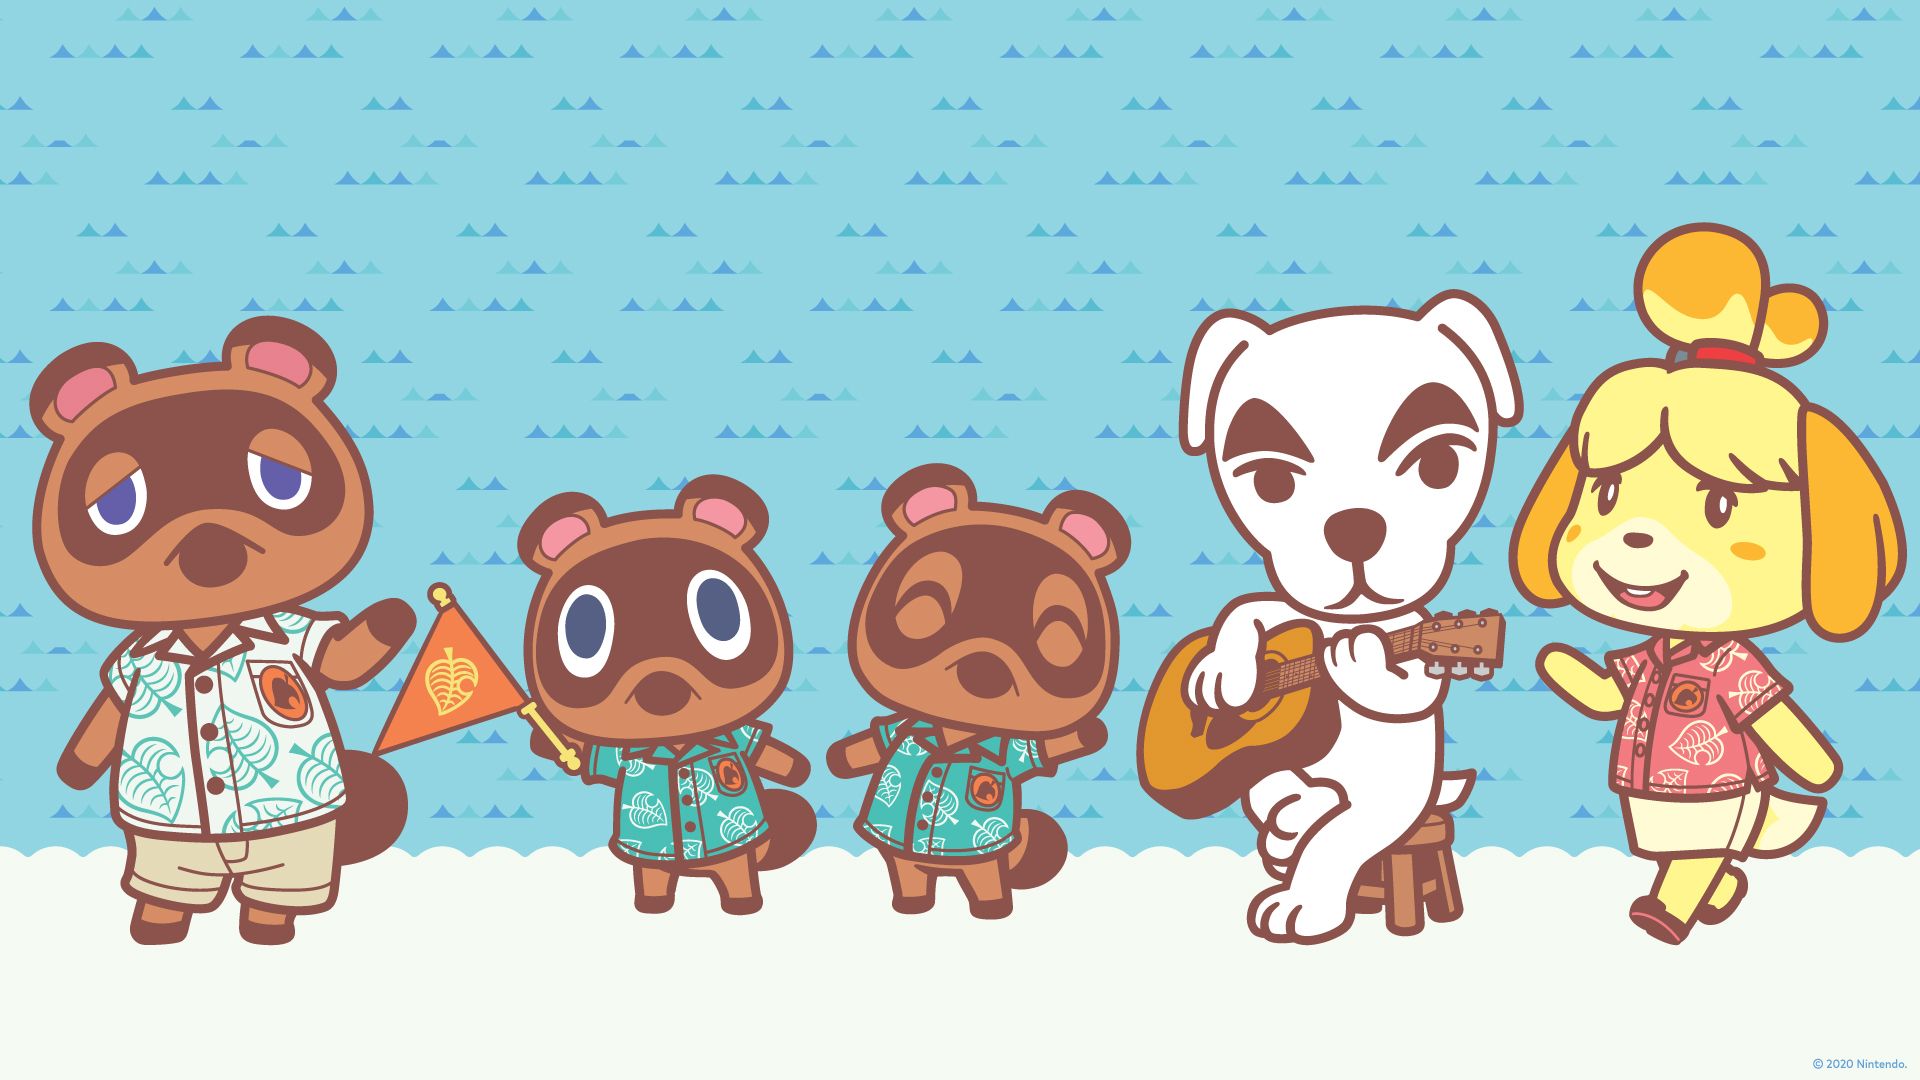 Animal Crossing characters Tom Nook, Timmy, Tommy, Isabelle, and a villager playing musical instruments. - Animal Crossing